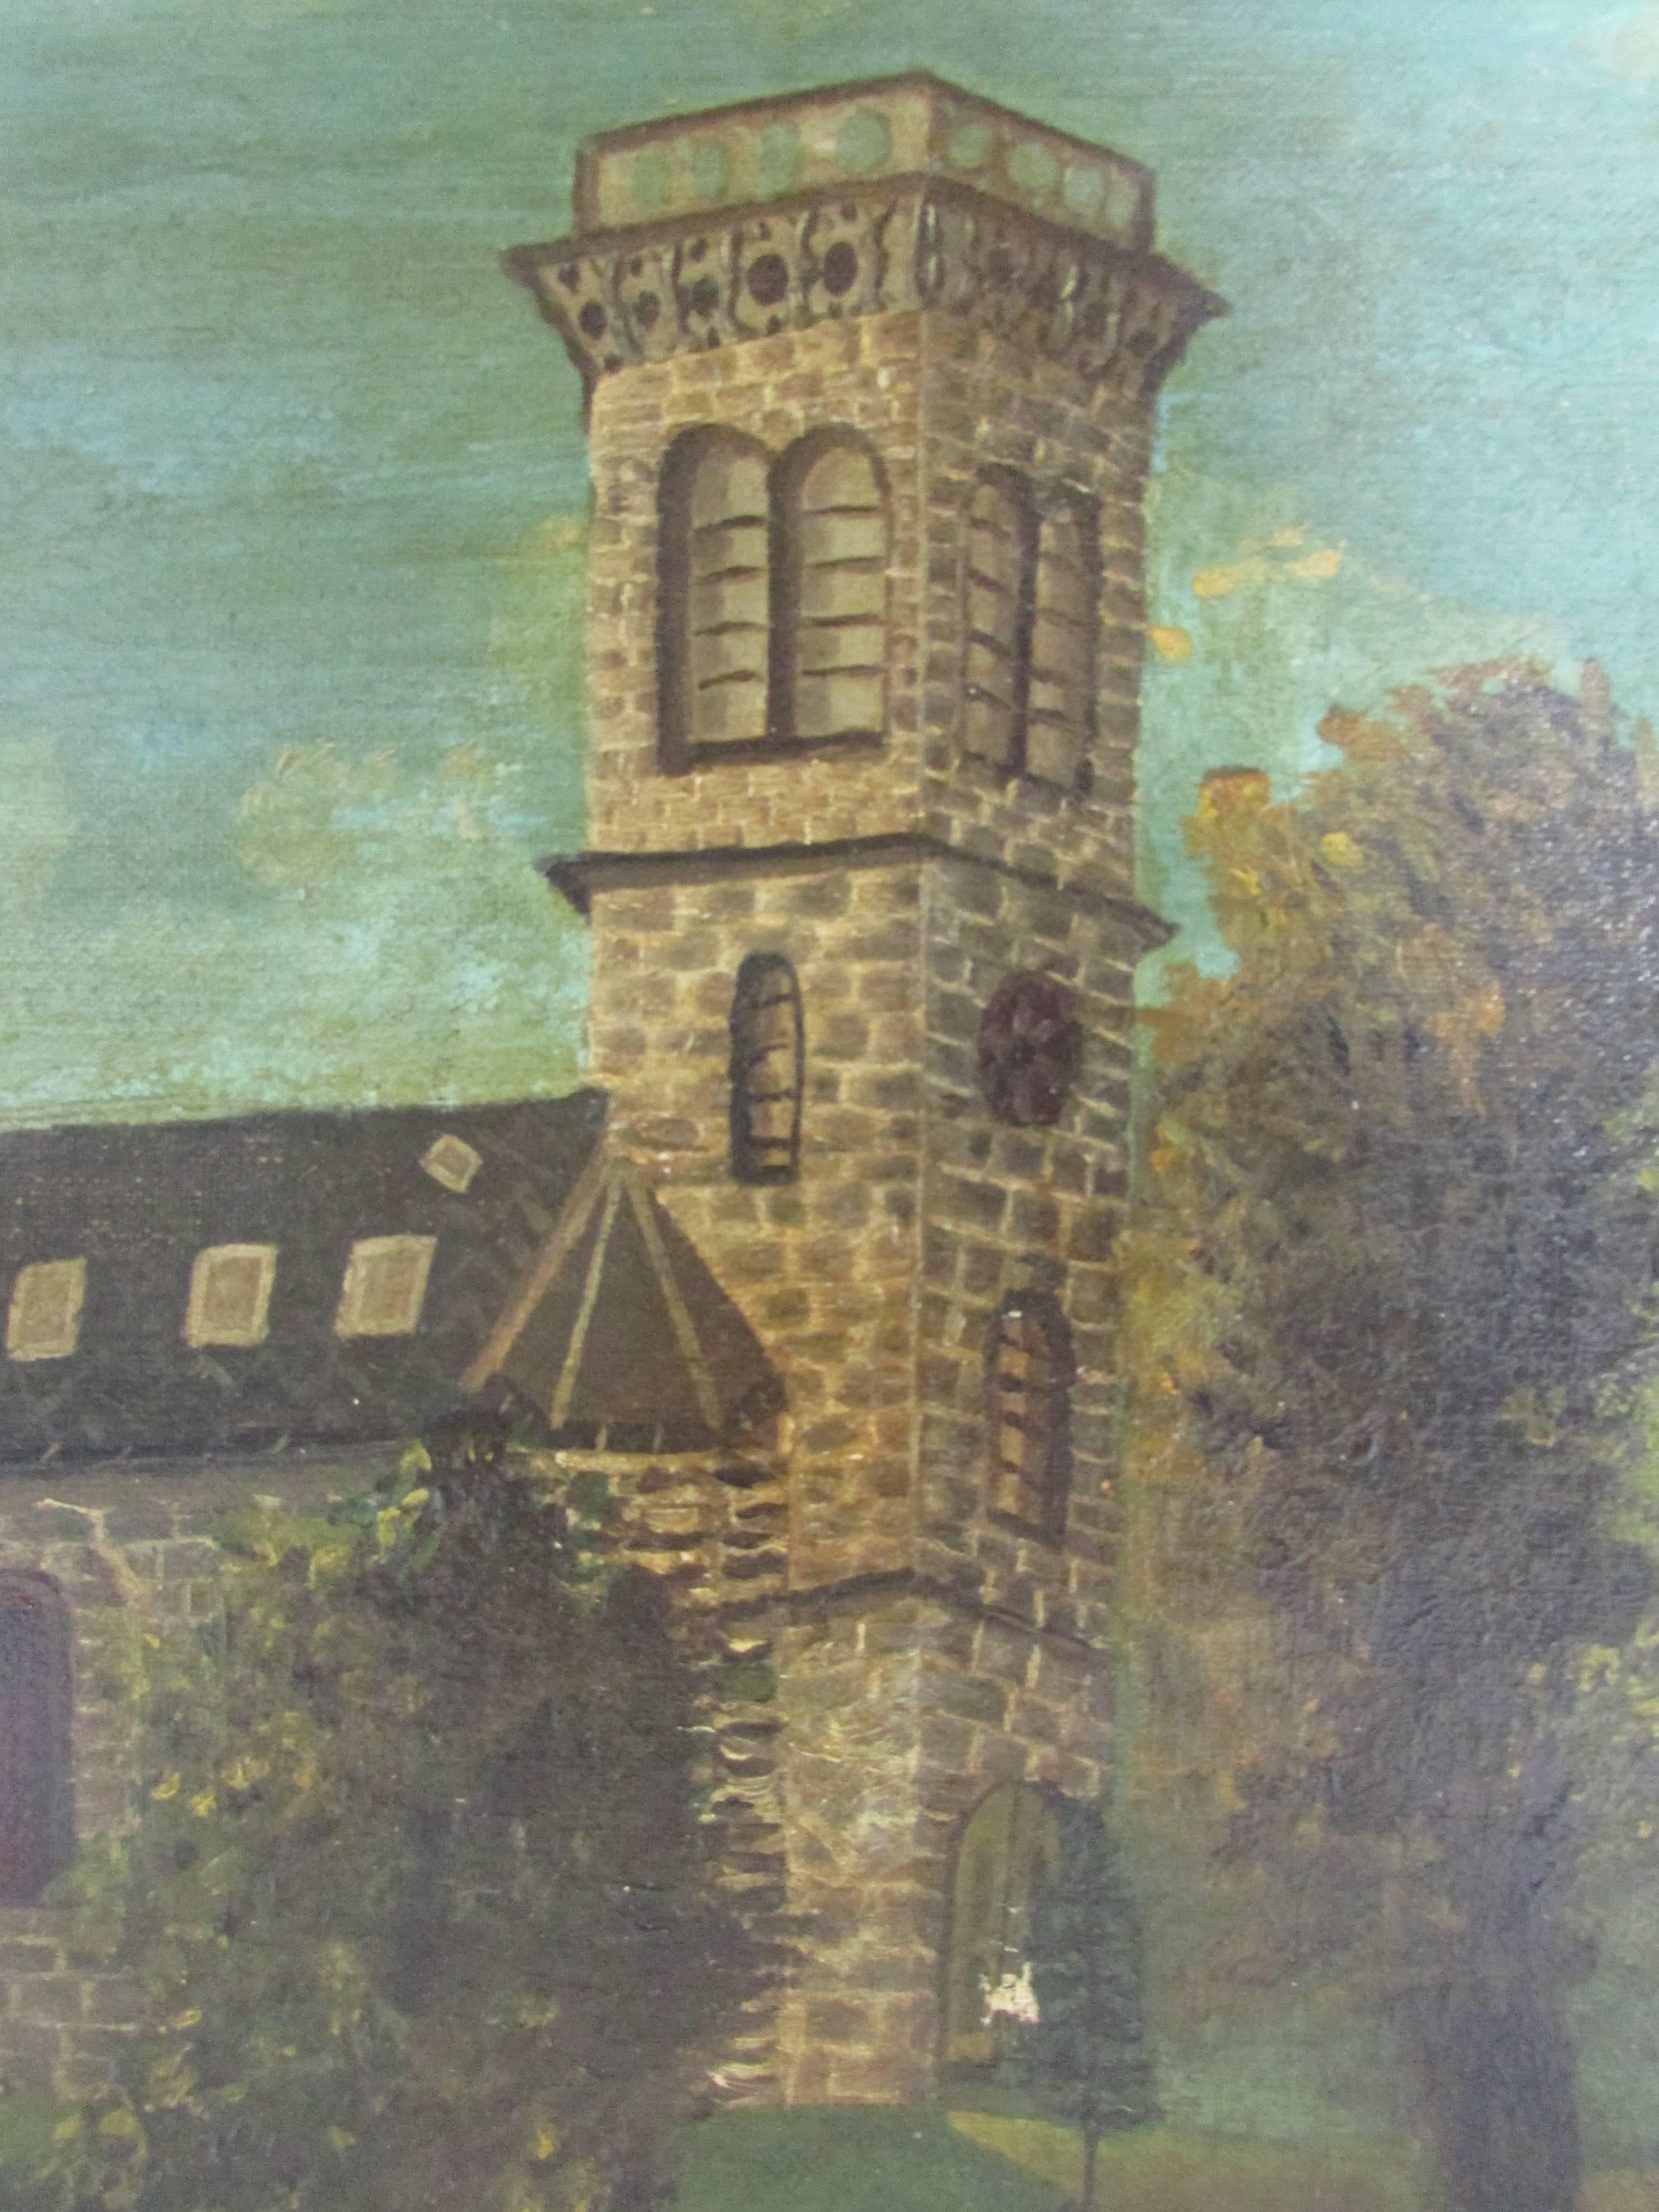 This is a lovely small painting of a countryside castle oil on canvas signed and dated 'MK 1886.'  On the backside, on the wood frame it reads, "PAT. OCT 7 '84." 